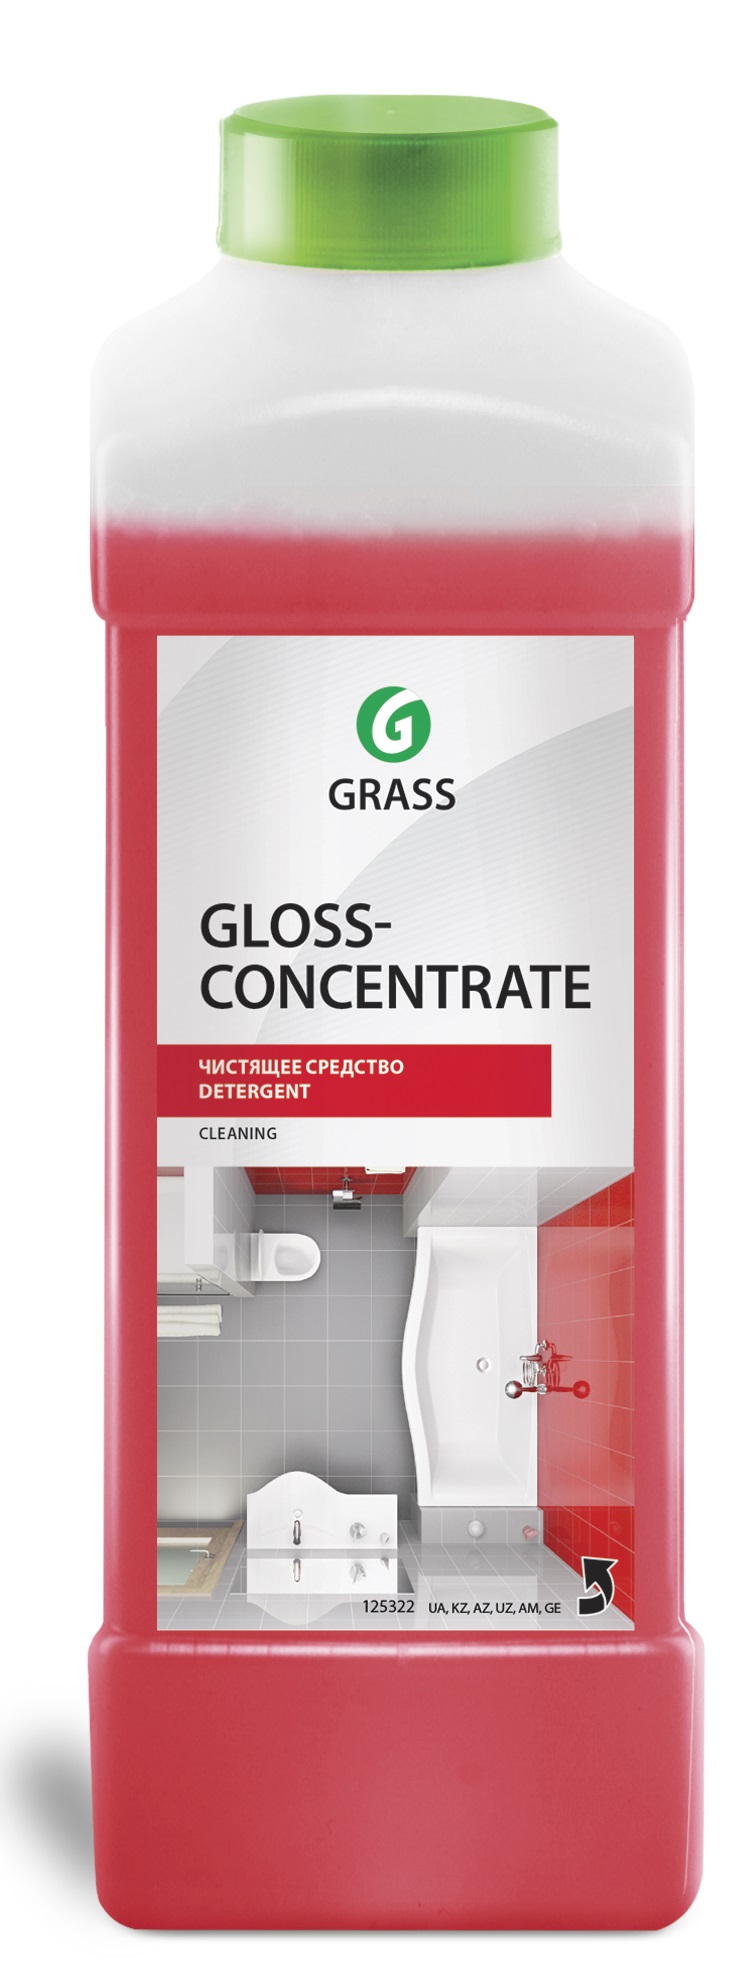     Gloss Concentrate 1 () GraSS ,,,)